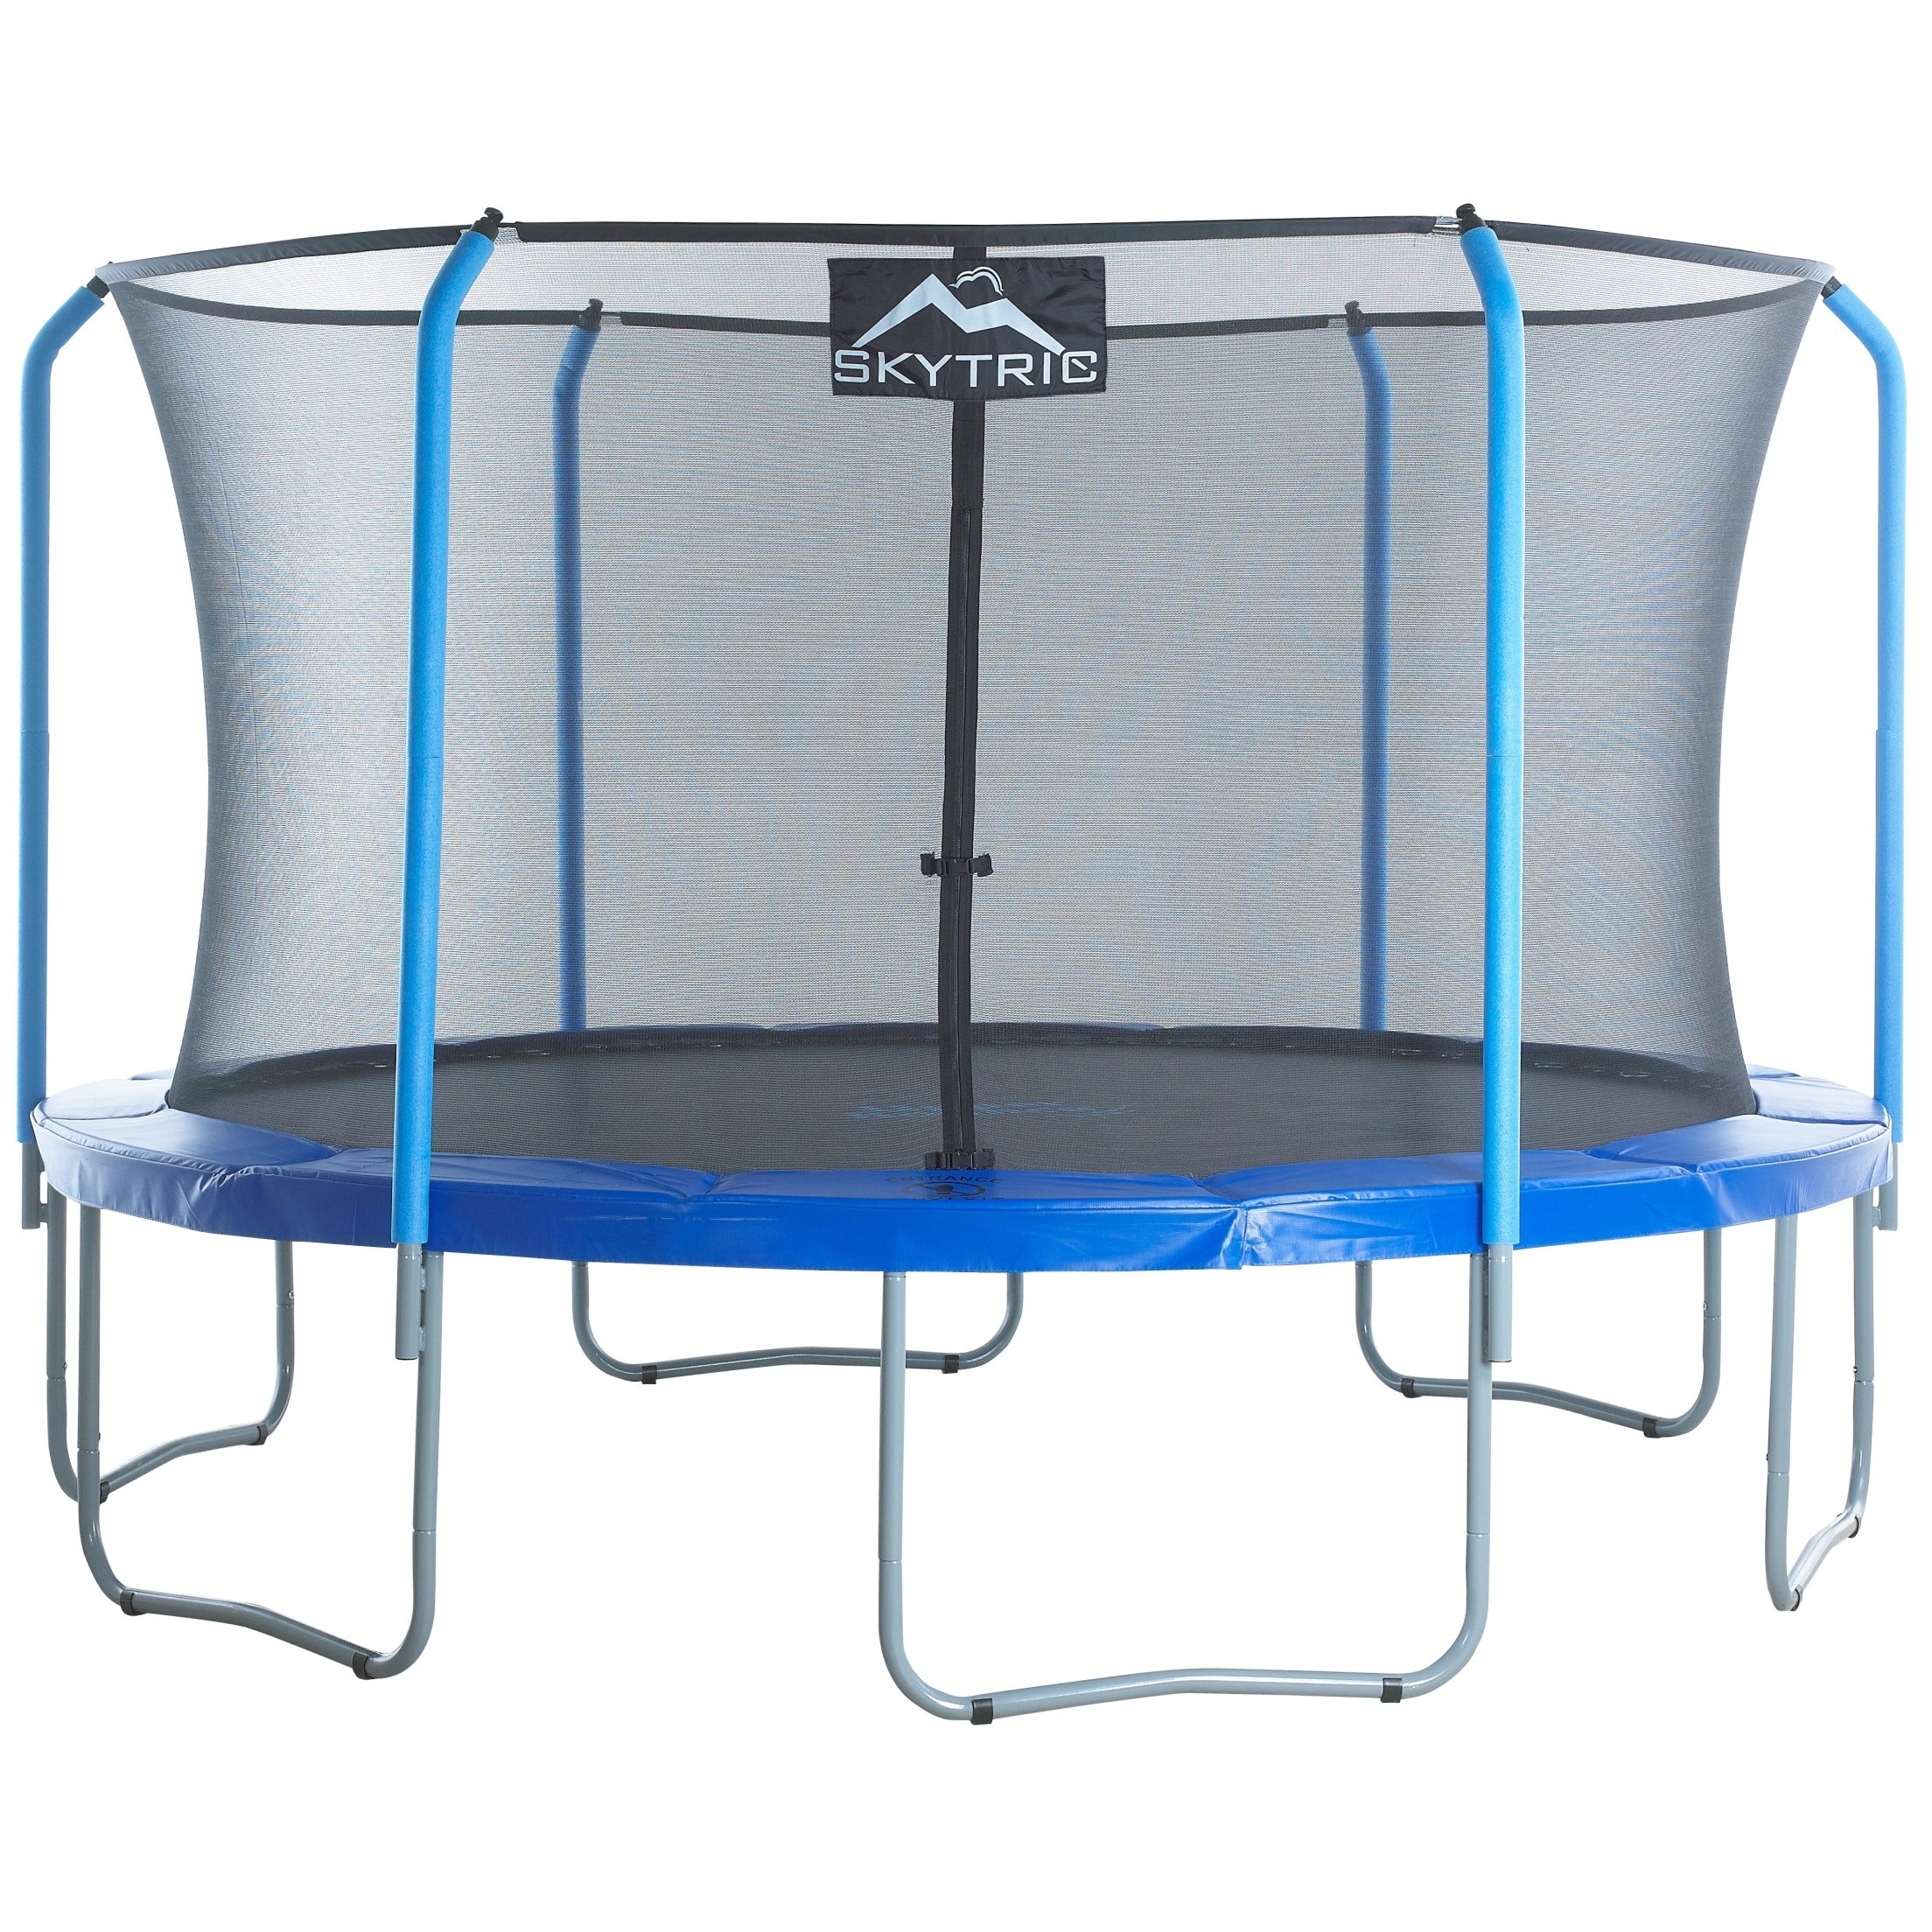 Skytric Easy assemble Trampoline With Top Ring Enclosure